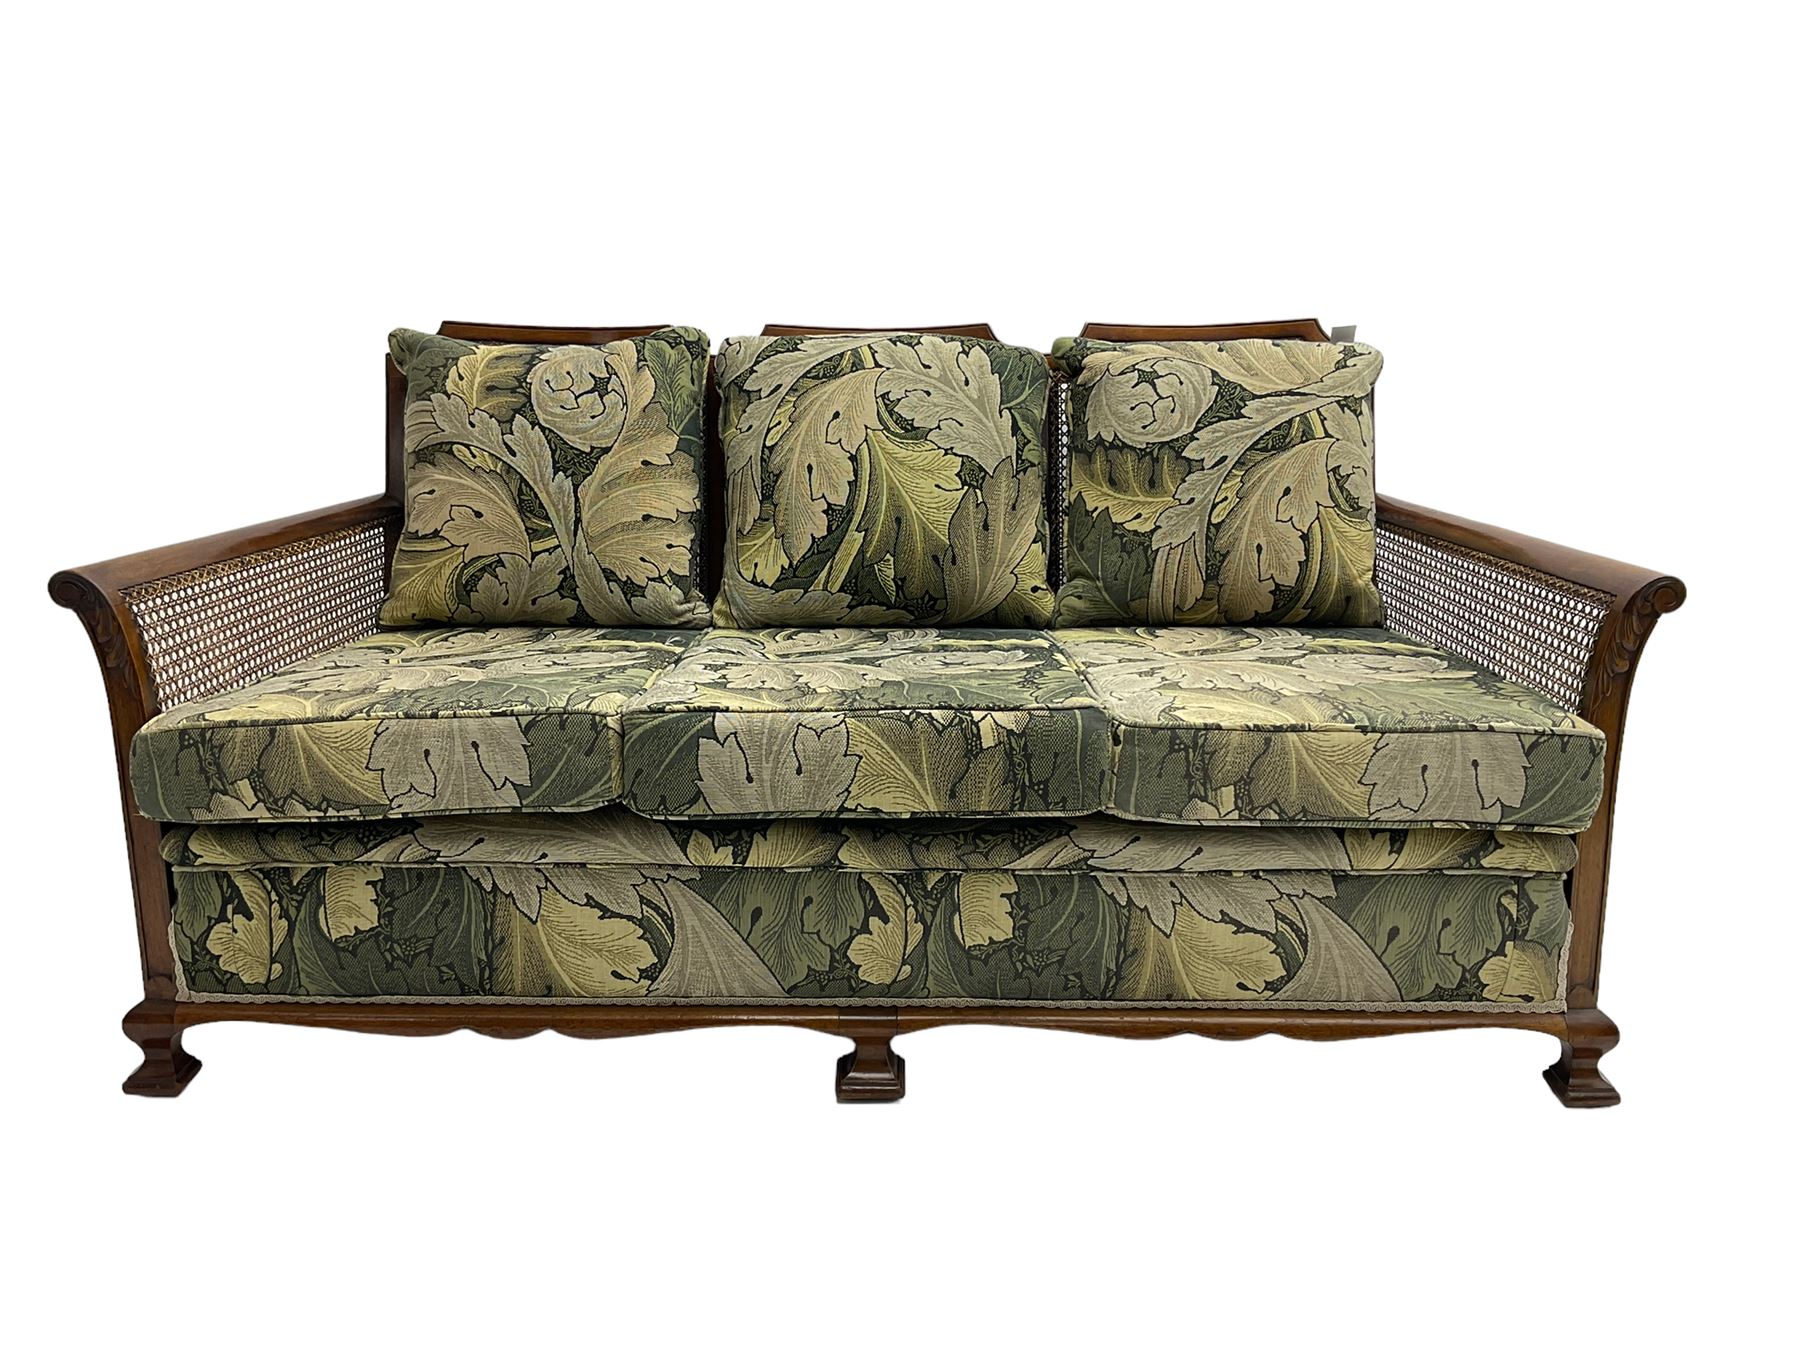 Early 20th century bergere lounge suite - Image 7 of 13